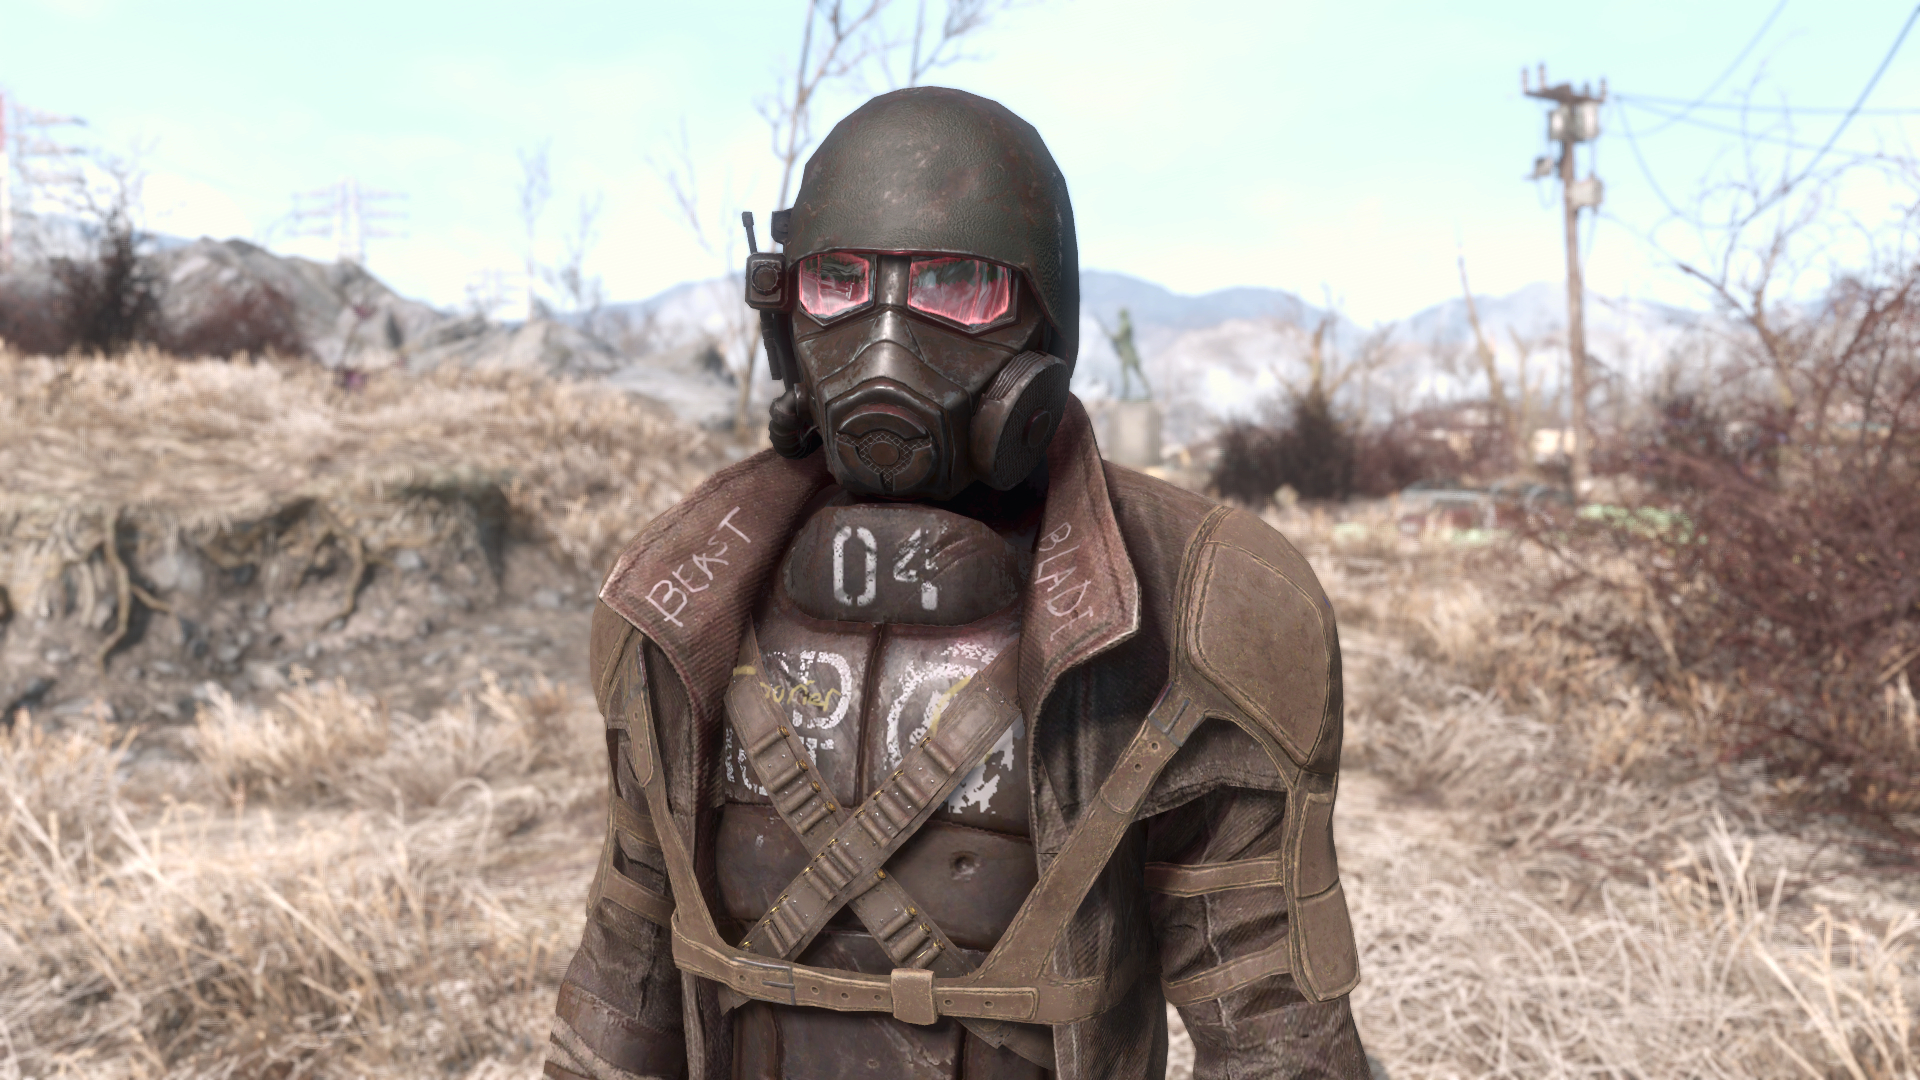 1920x1080 Fallout Fallout 4 Video Games PC Gaming Mask Apocalyptic Screen Shot NCR New California Republic Wallpaper Resolution: ID:396958